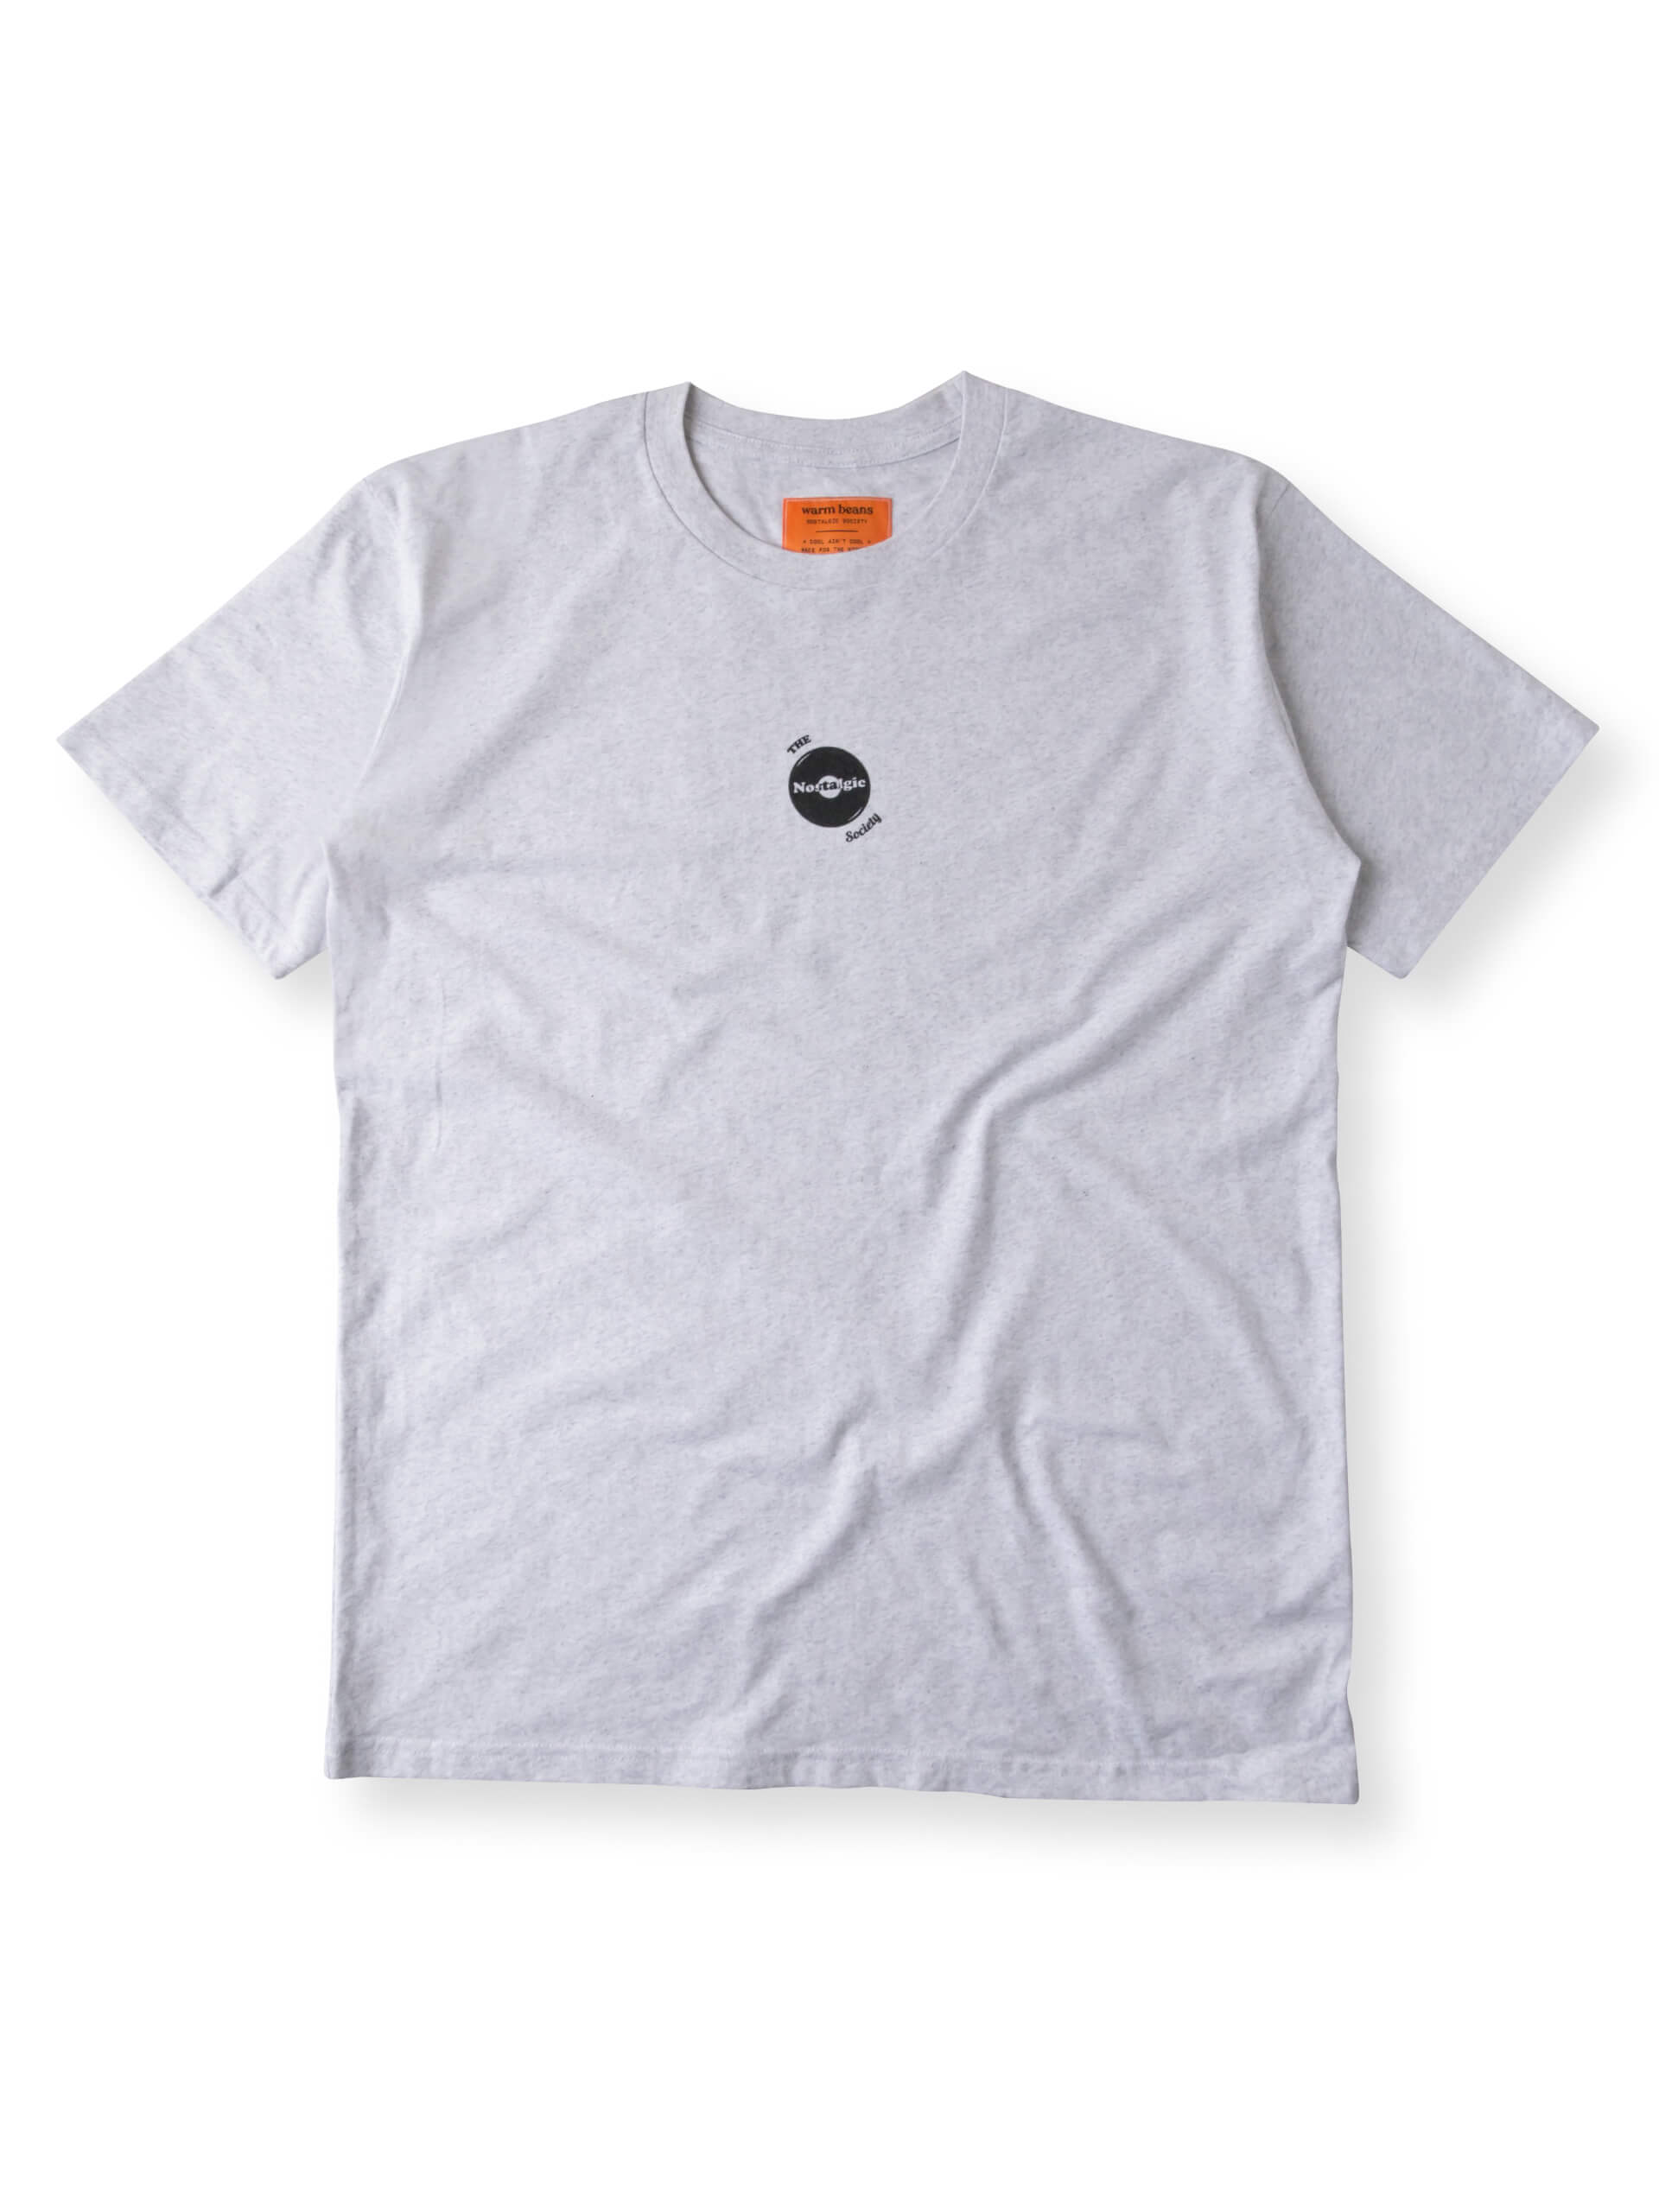 Warm Beans Record Tee